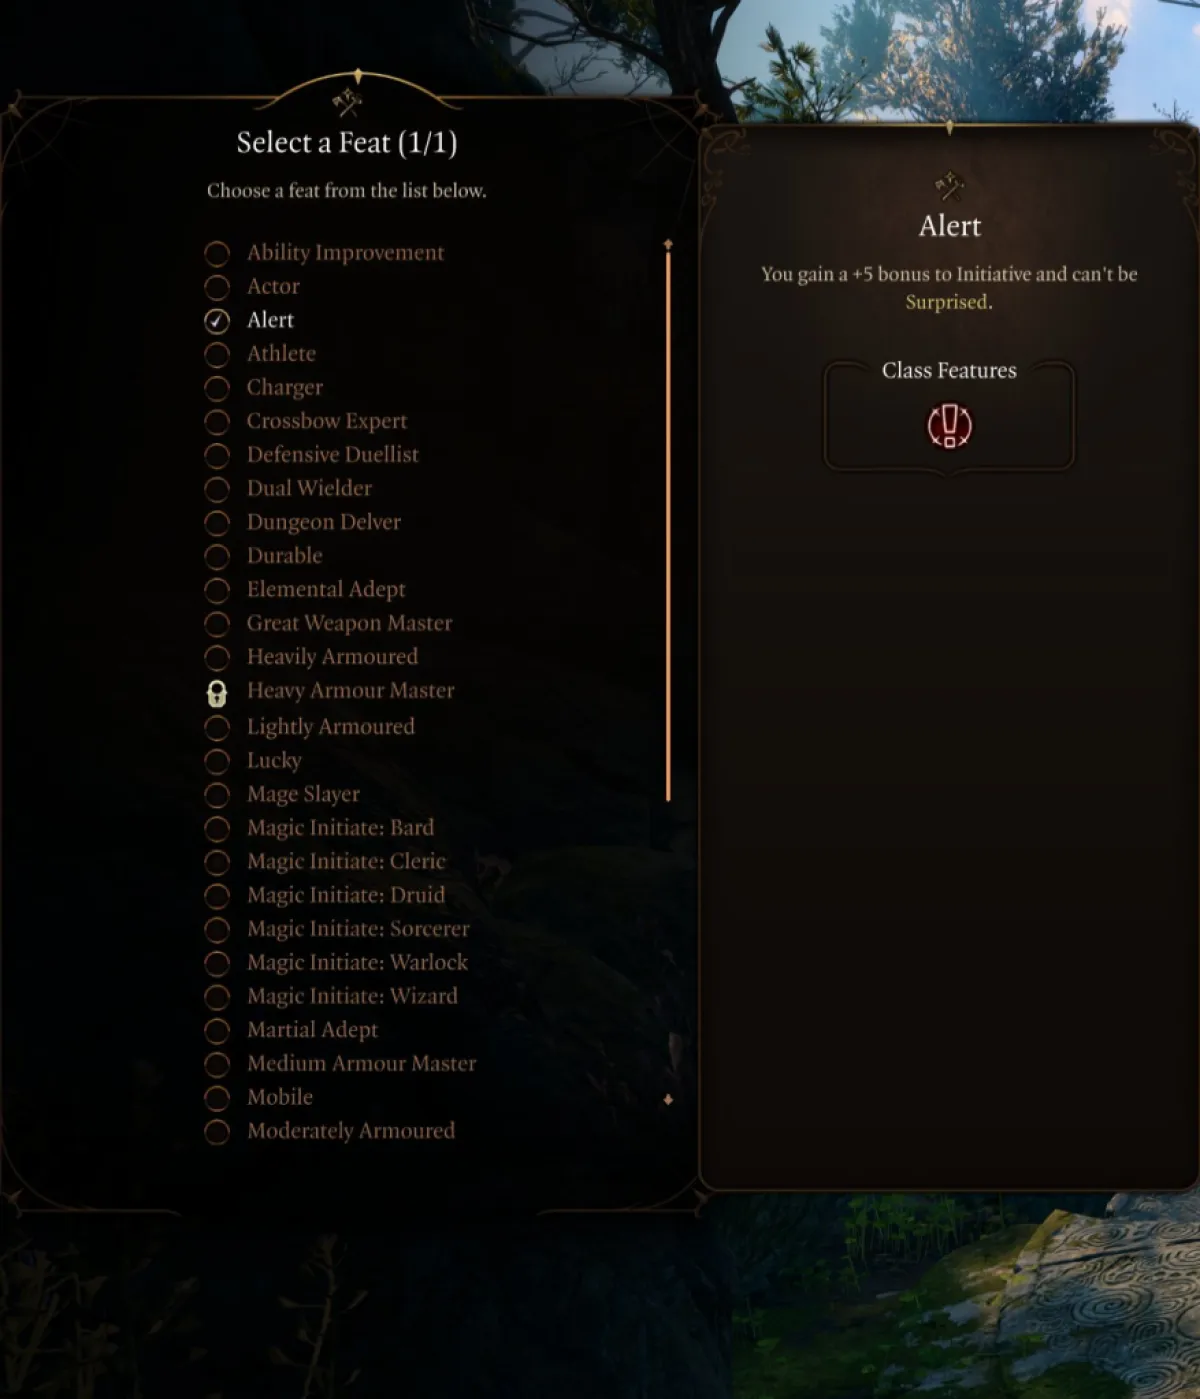 An image showing the Alert feat in Baldur's Gate 3 BG3 as part of a best builds guide for Druids.